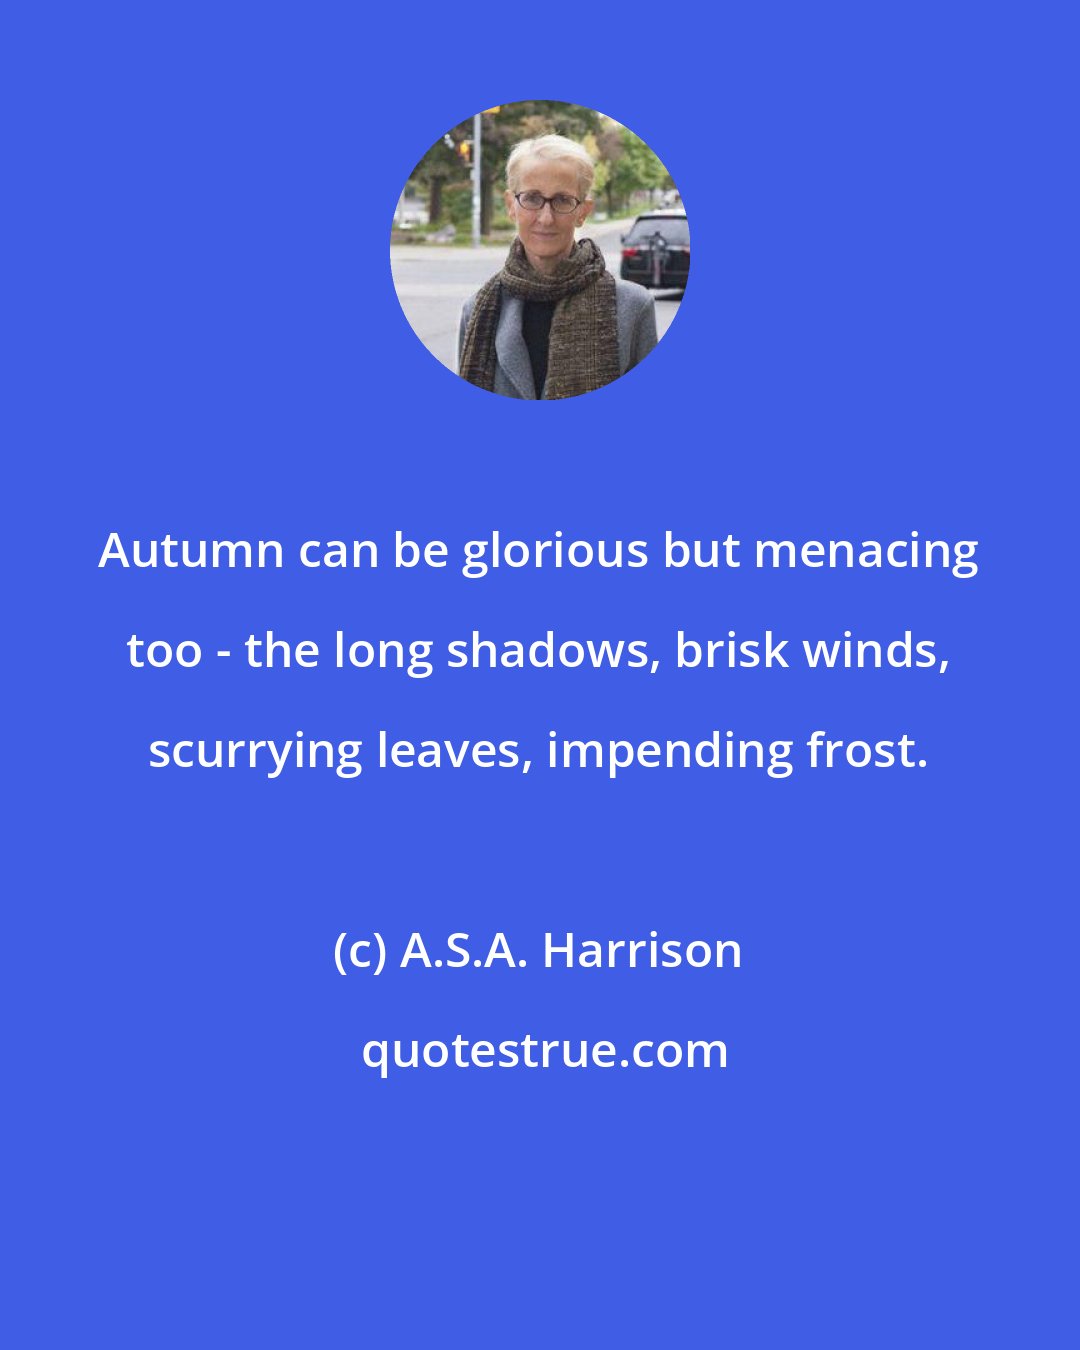 A.S.A. Harrison: Autumn can be glorious but menacing too - the long shadows, brisk winds, scurrying leaves, impending frost.